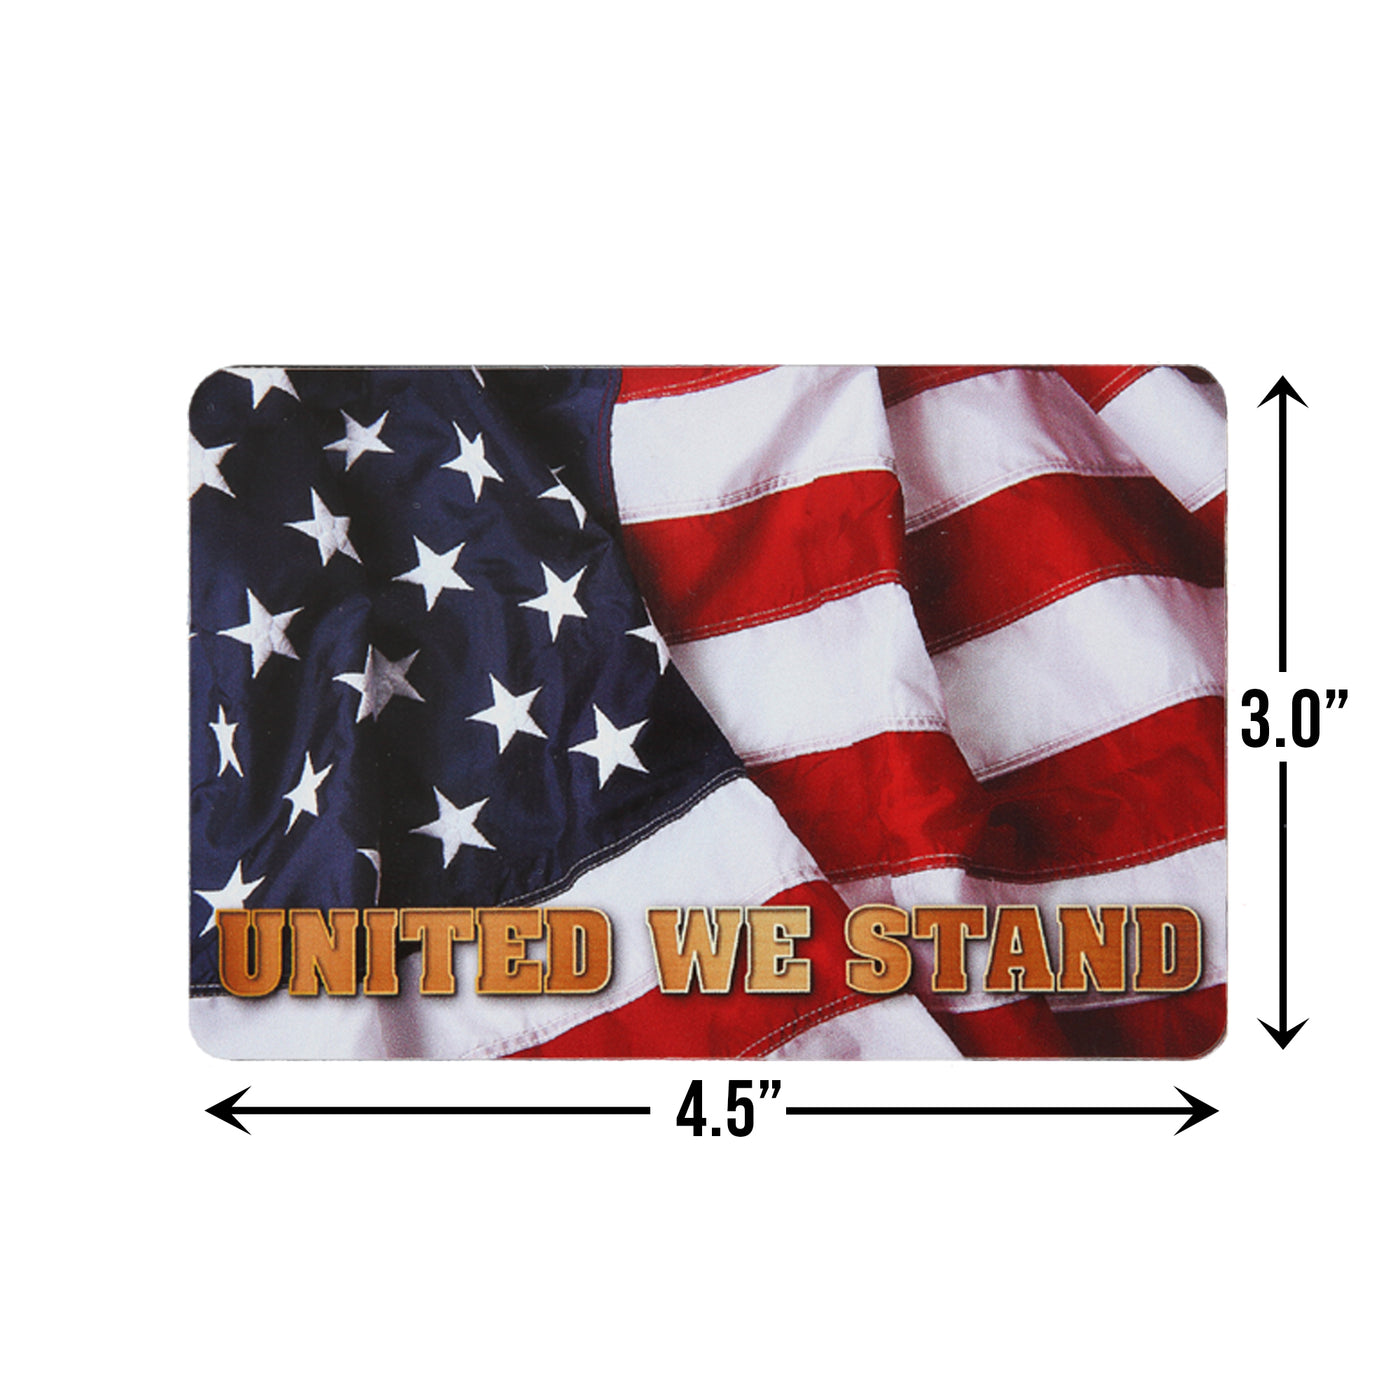 Patriotic United We Stand Decal